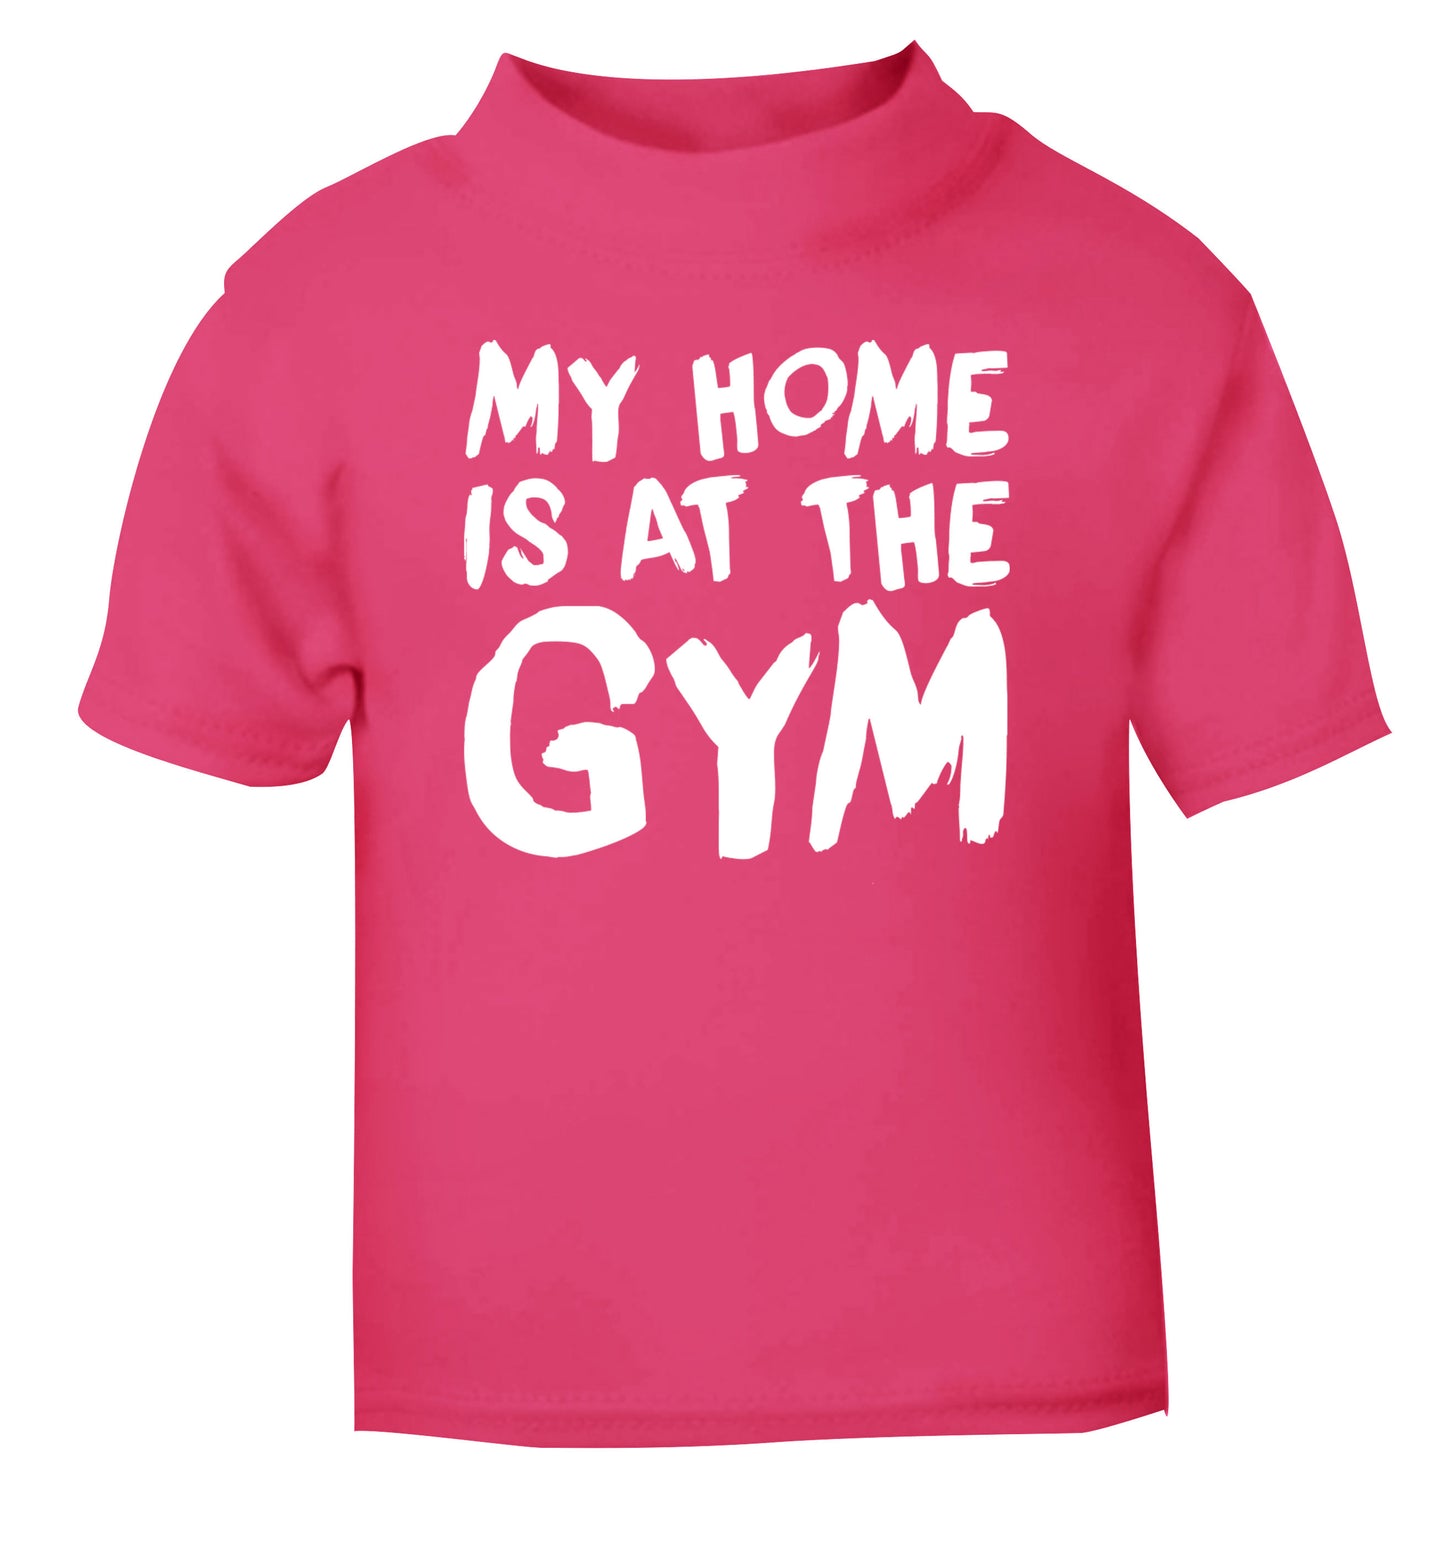 My home is at the gym pink Baby Toddler Tshirt 2 Years